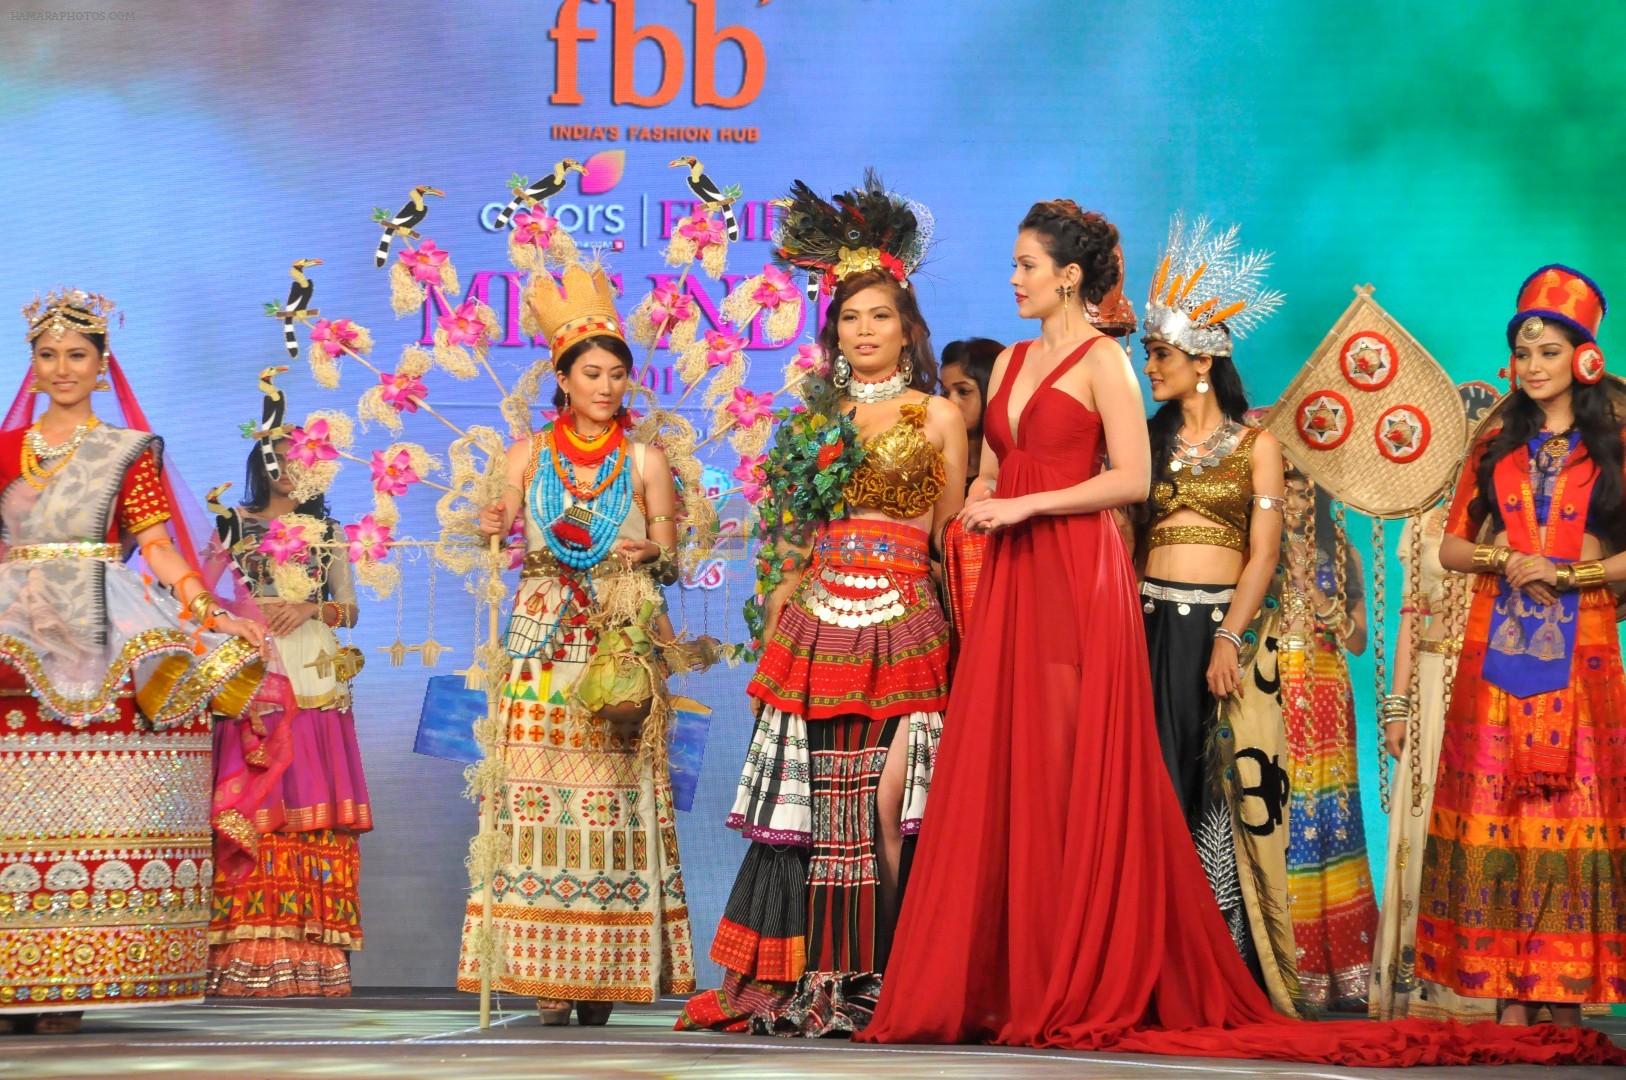 Waluscha de Sousa during the sub contest ceremony of fbb femina Miss India 2017 in Mumbai on 20th June 2017